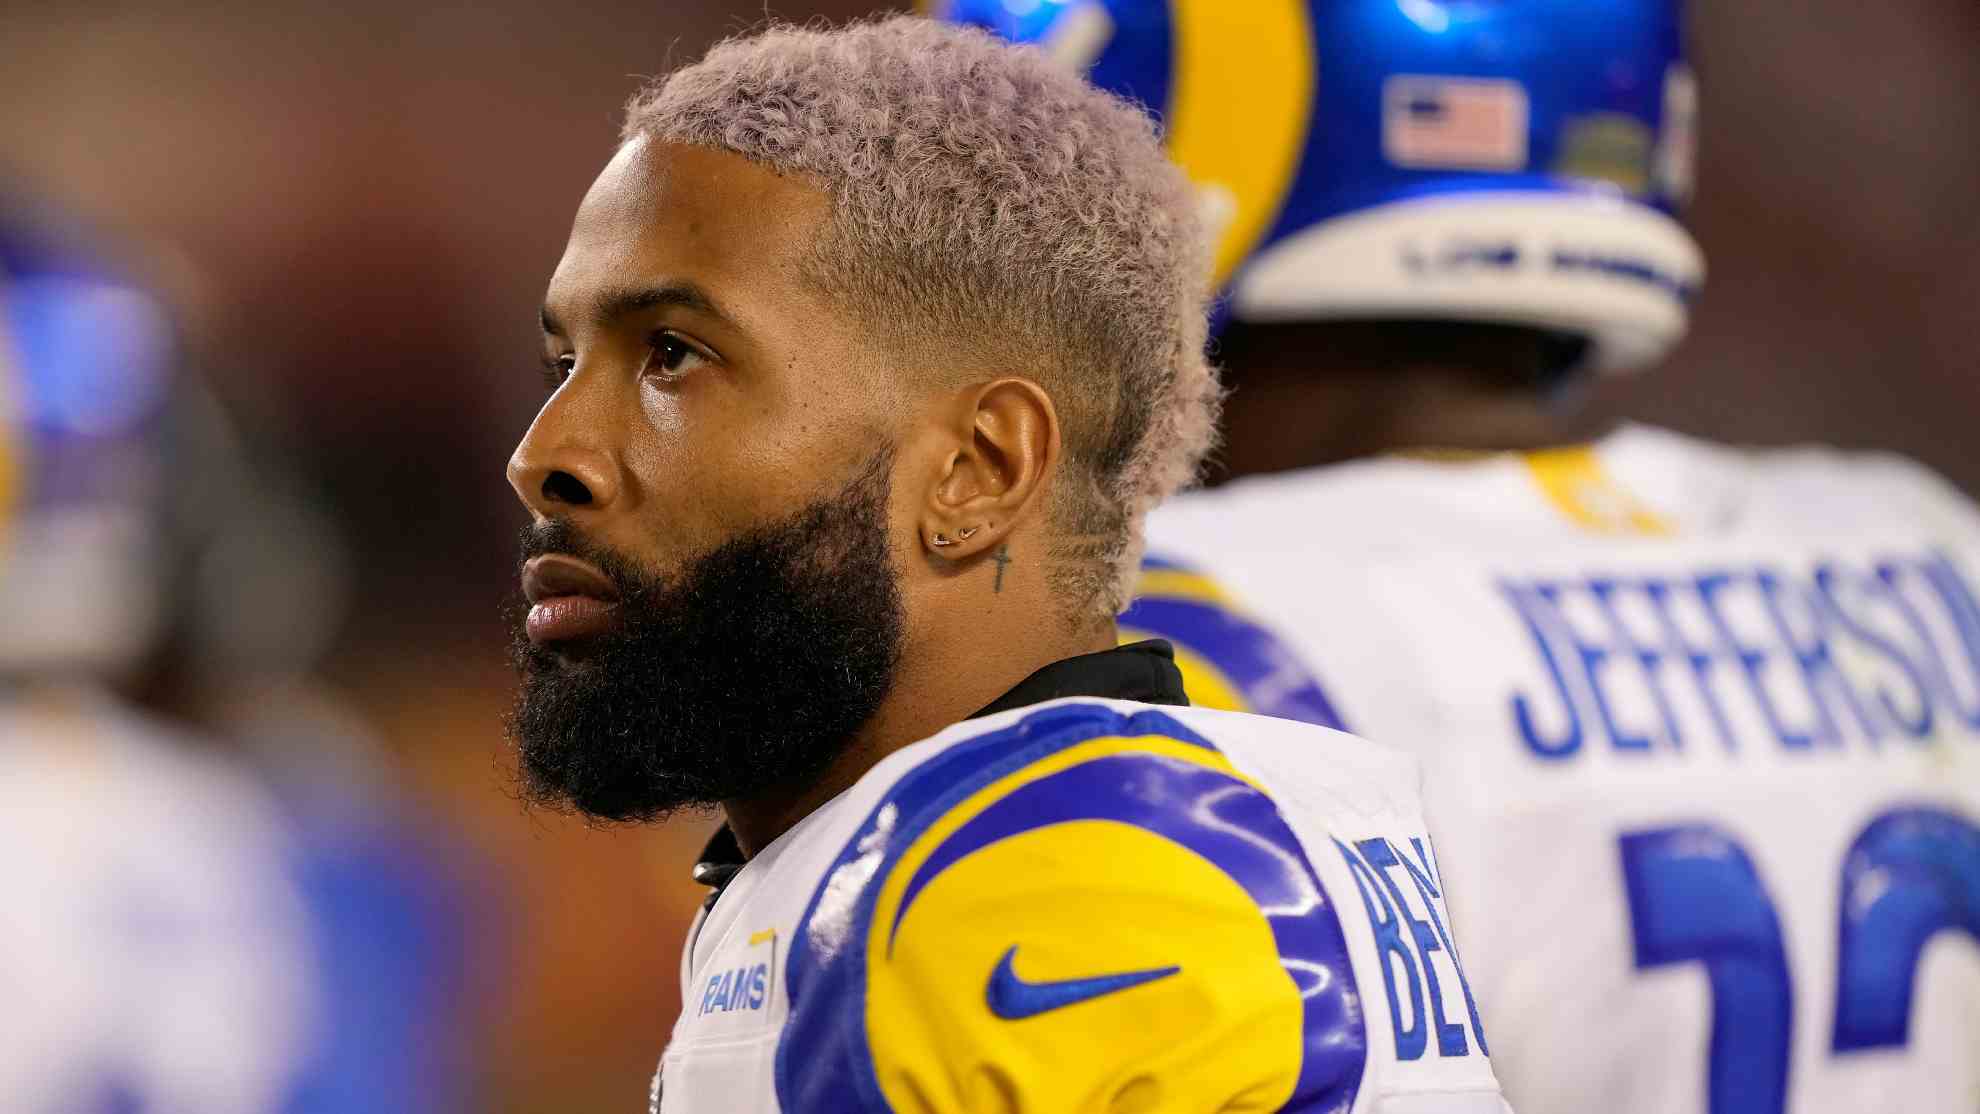 First Look at Odell Beckham Jr. on the Rams in Madden 22 